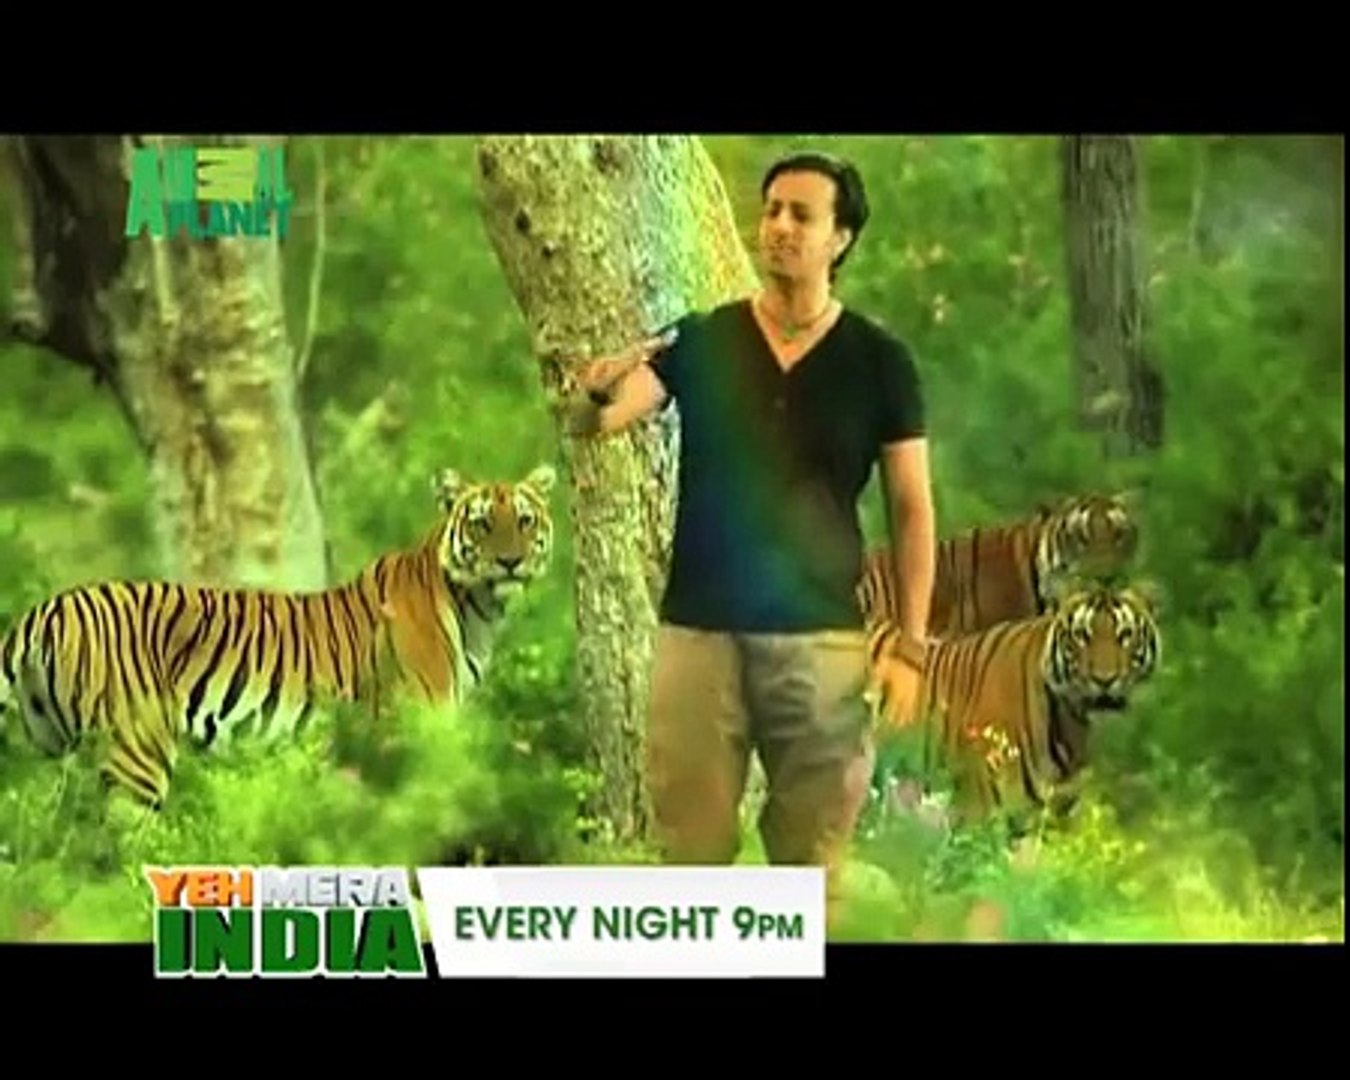 Yeh Mera India Anthem Animal Planet Discovery Channel Hq Video Dailymotion